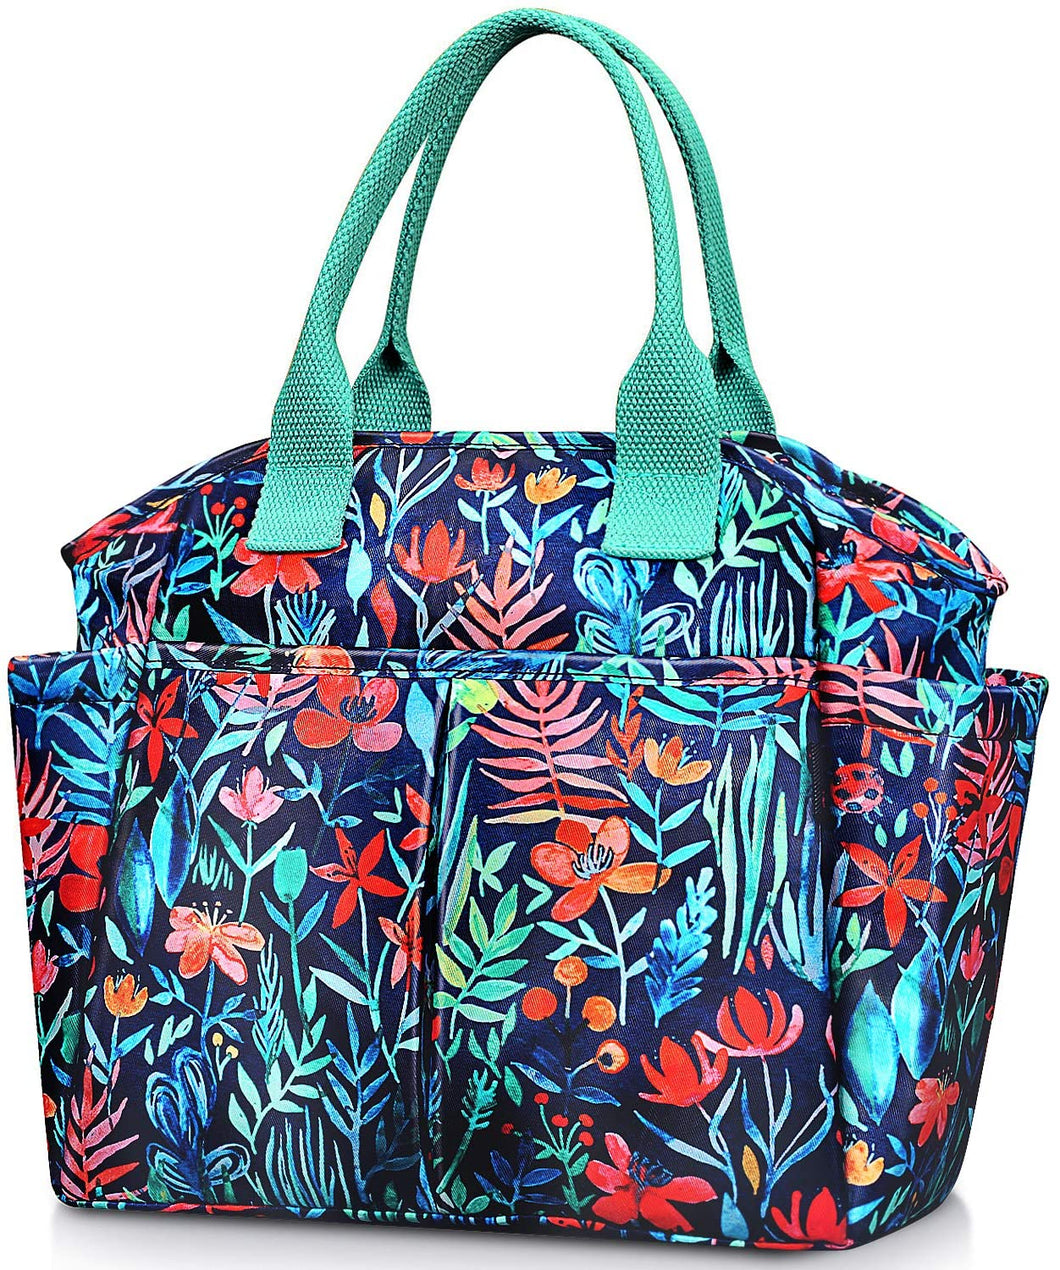 Insulated Lunch Bag, Leakproof Lunch Cooler with Front and Side Pockets - Jungle Night